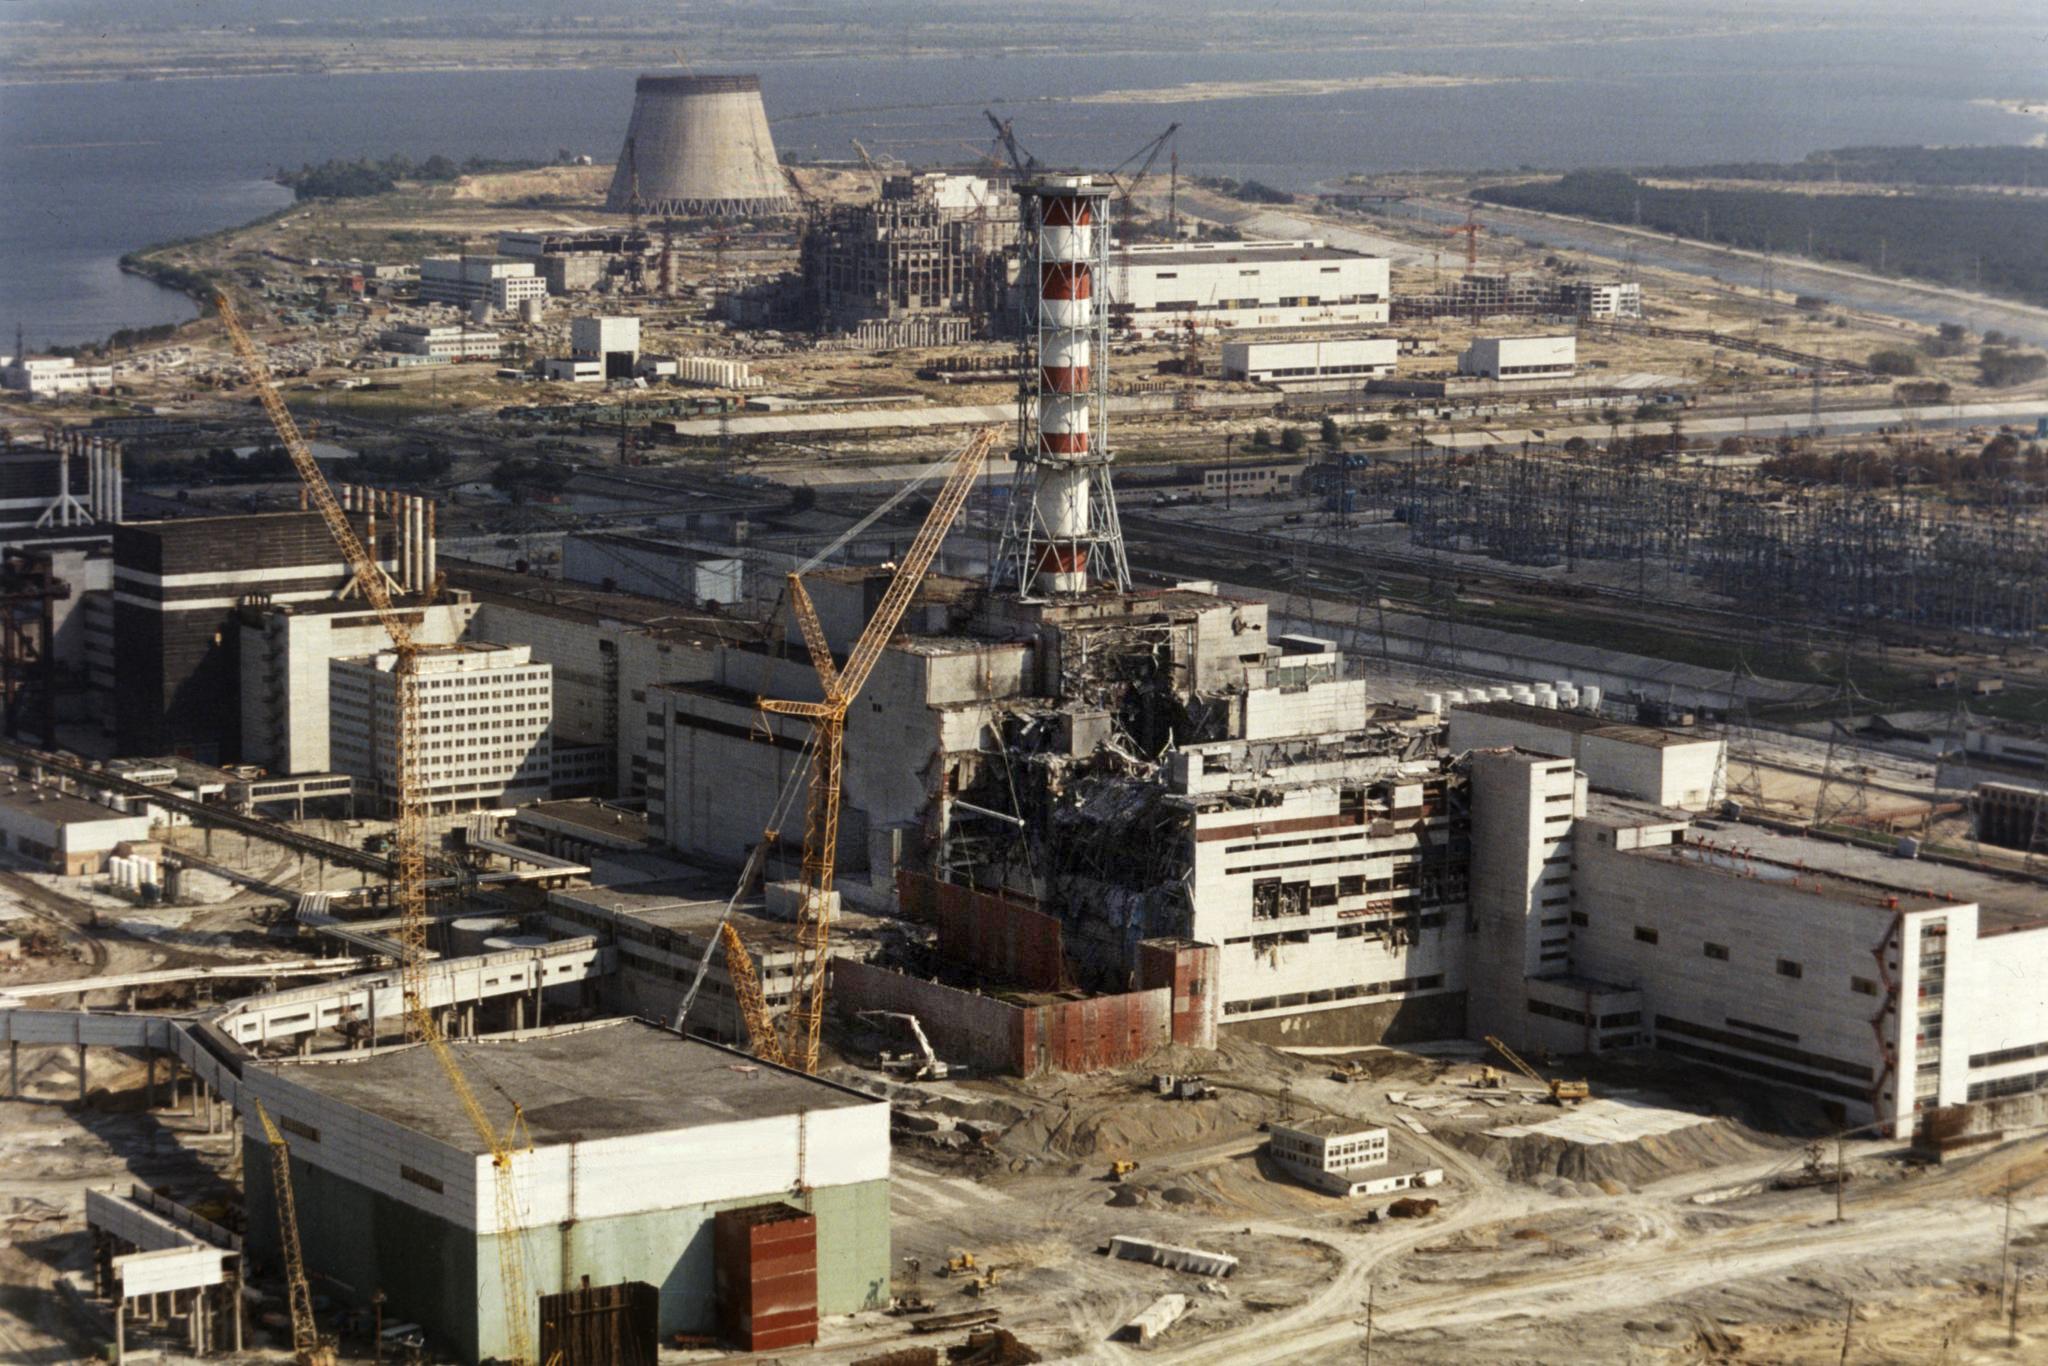 RUSSIA CHERNOBYL NUCLEAR PLANT DISASTER